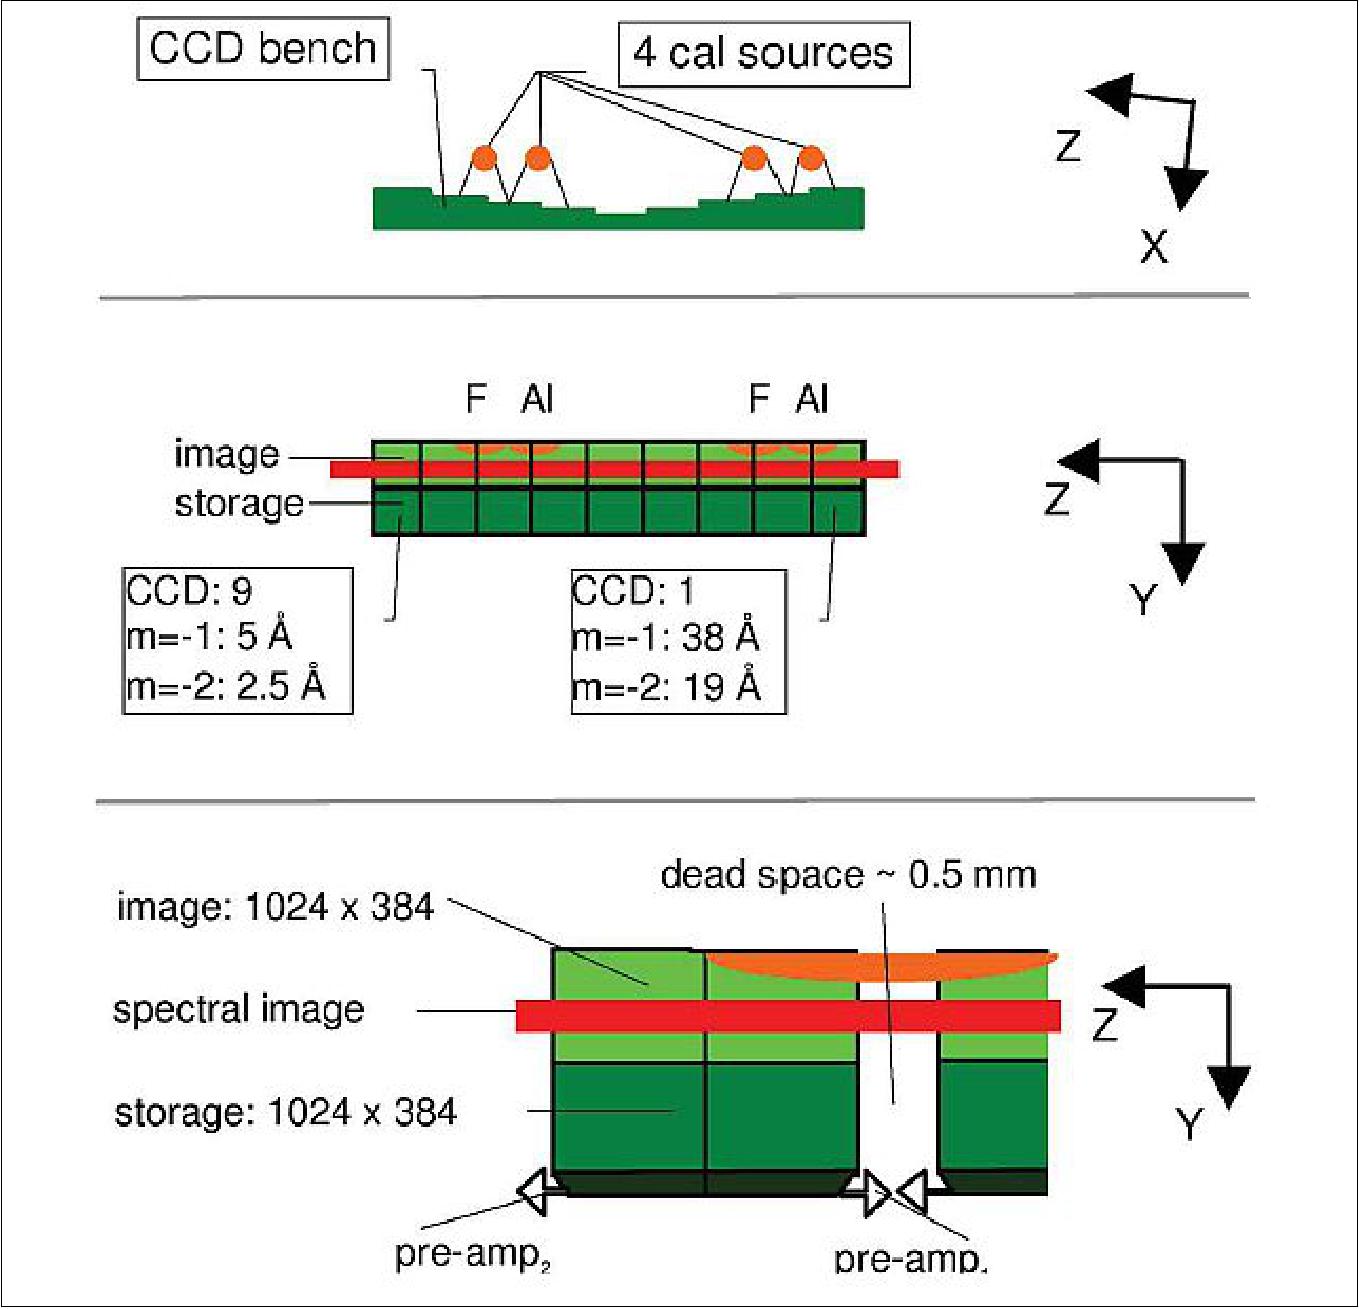 Figure 150: CCD bench (right most two panels) as well an enlarged view of two adjacent CCDs (left panel). The dead space indicated is present between each pair of CCD’s. The figure is not to scale (image credit: ESA)